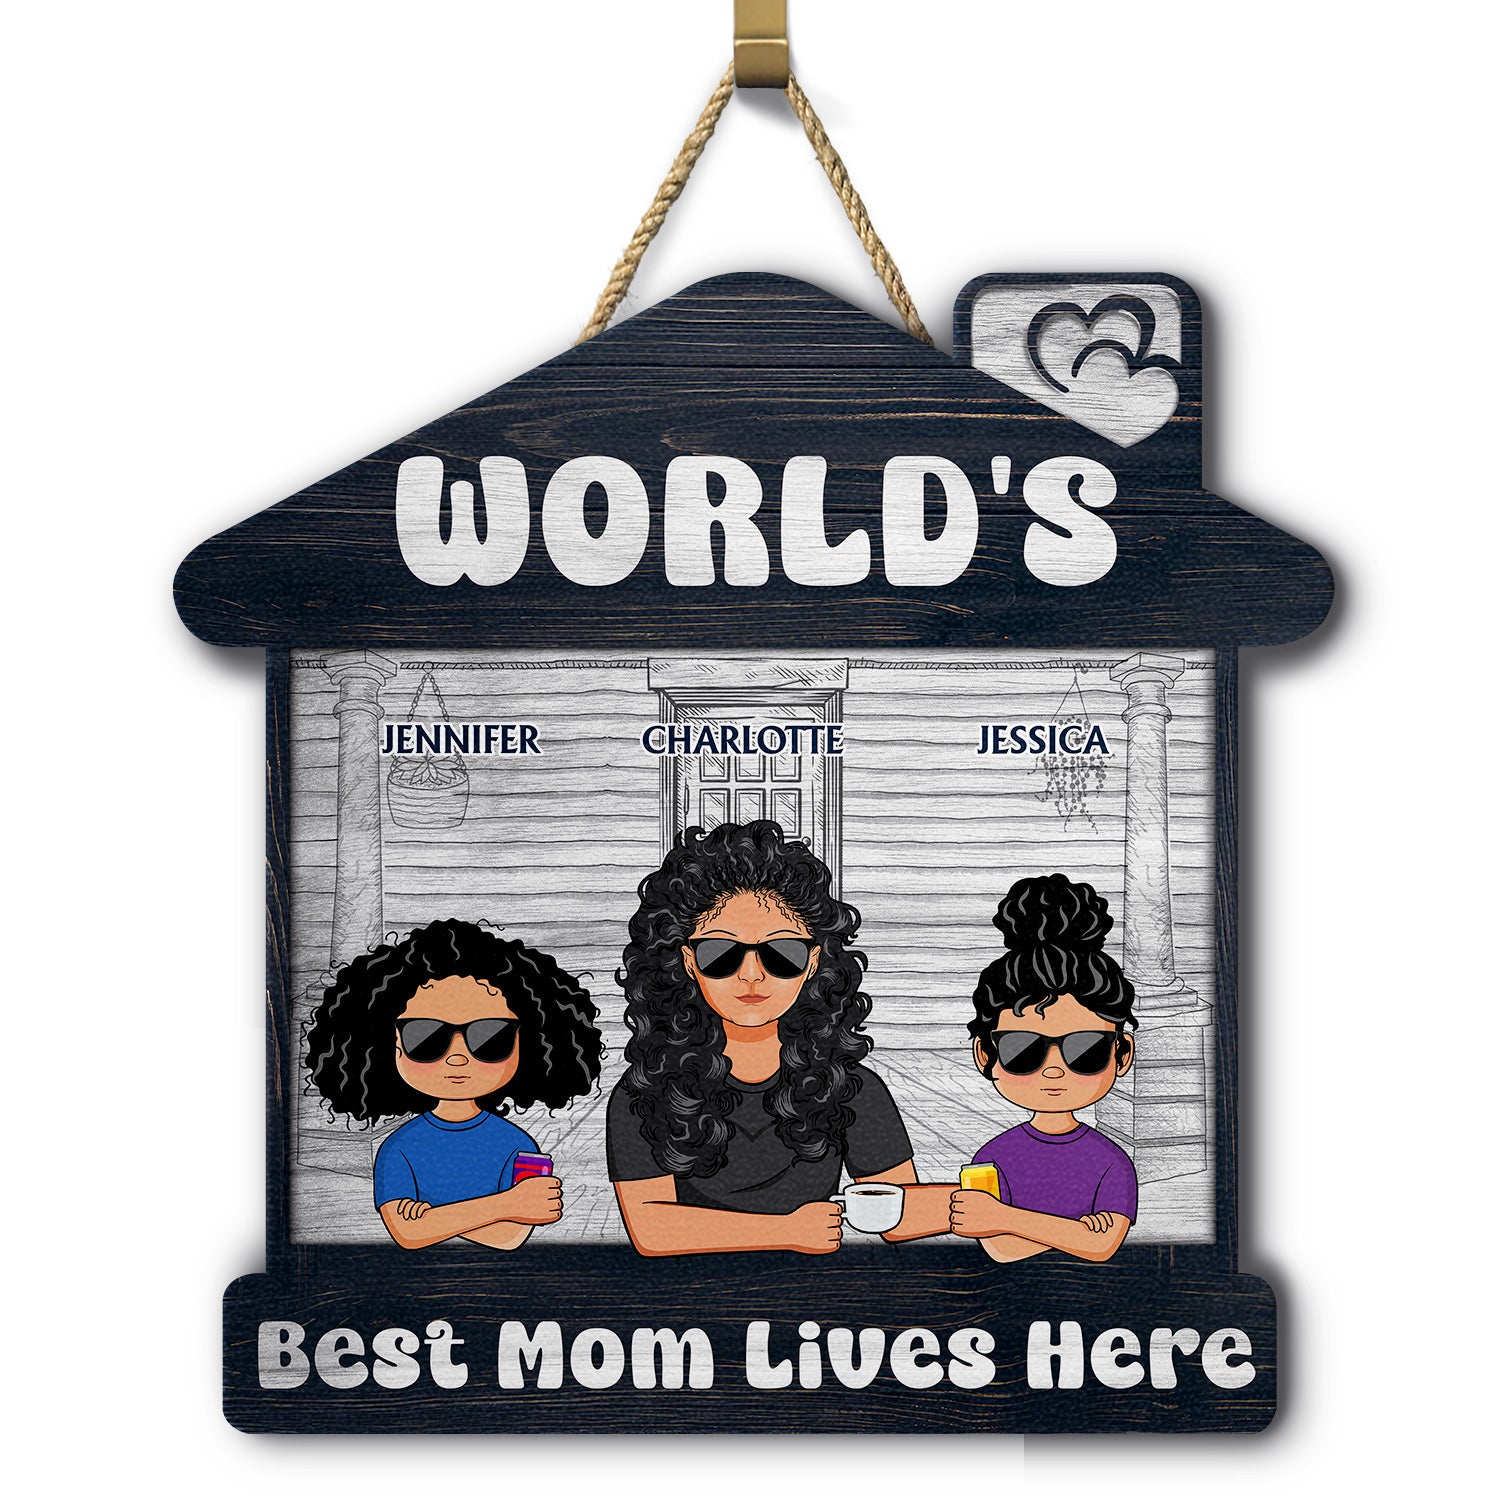 World's Best Mom Lives Here - Gift For Mom - Personalized Custom Shaped Wood Sign